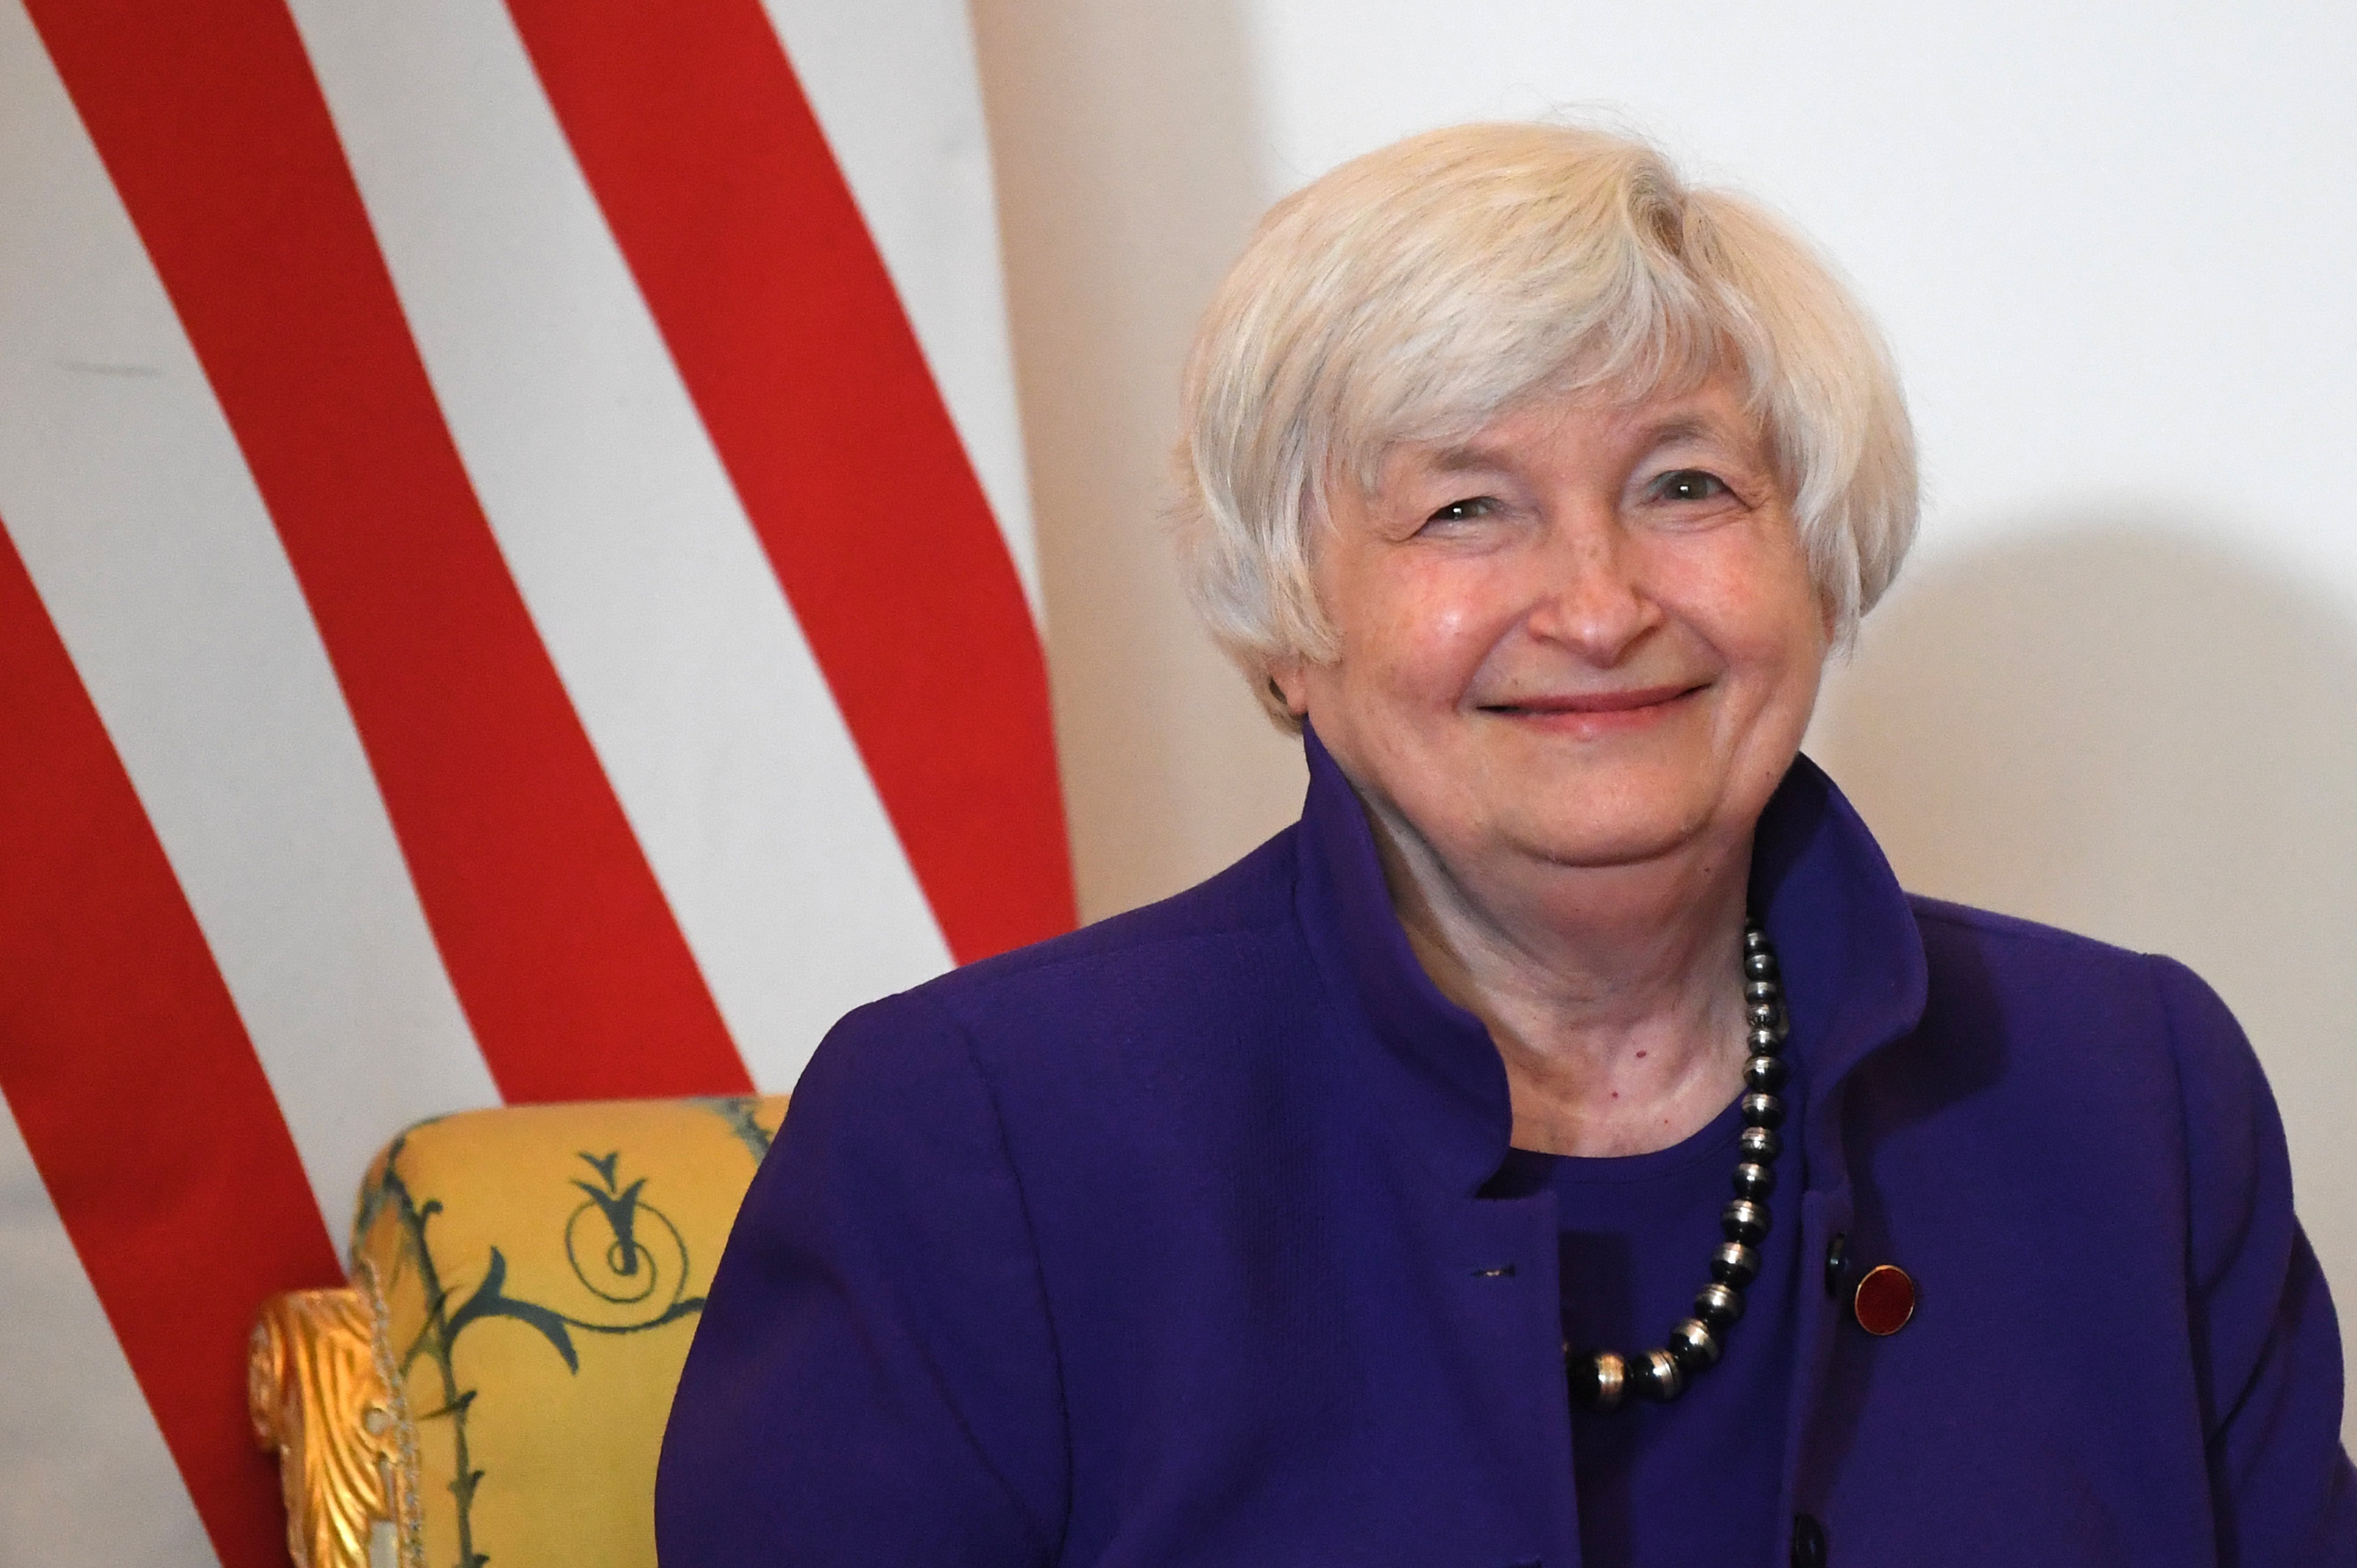 US Treasury Secretary Janet Yellen has said the new global minimum corporate tax rate of 15% is unlikely to be changed (PA)